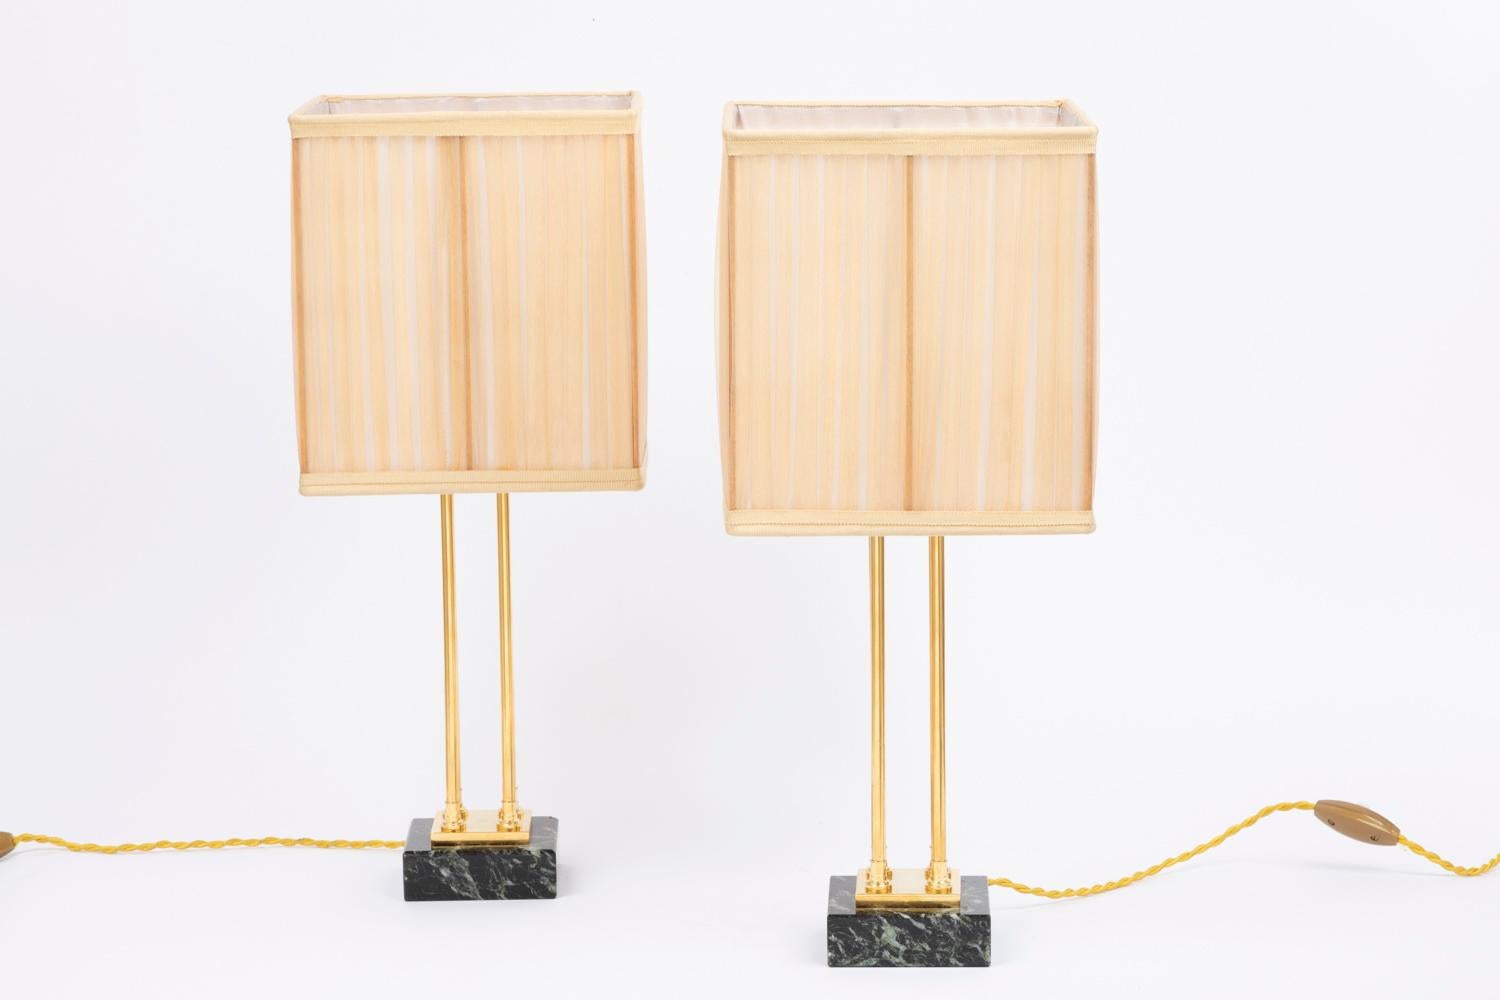 Pair of Empire style lamps in gilt bronze and marble. Shaft composed of four small columns configured in square, topped by a square plate and a small ball.
Square shape base in sea green marble topped by a smaller gilt bronze plate.

Work realized